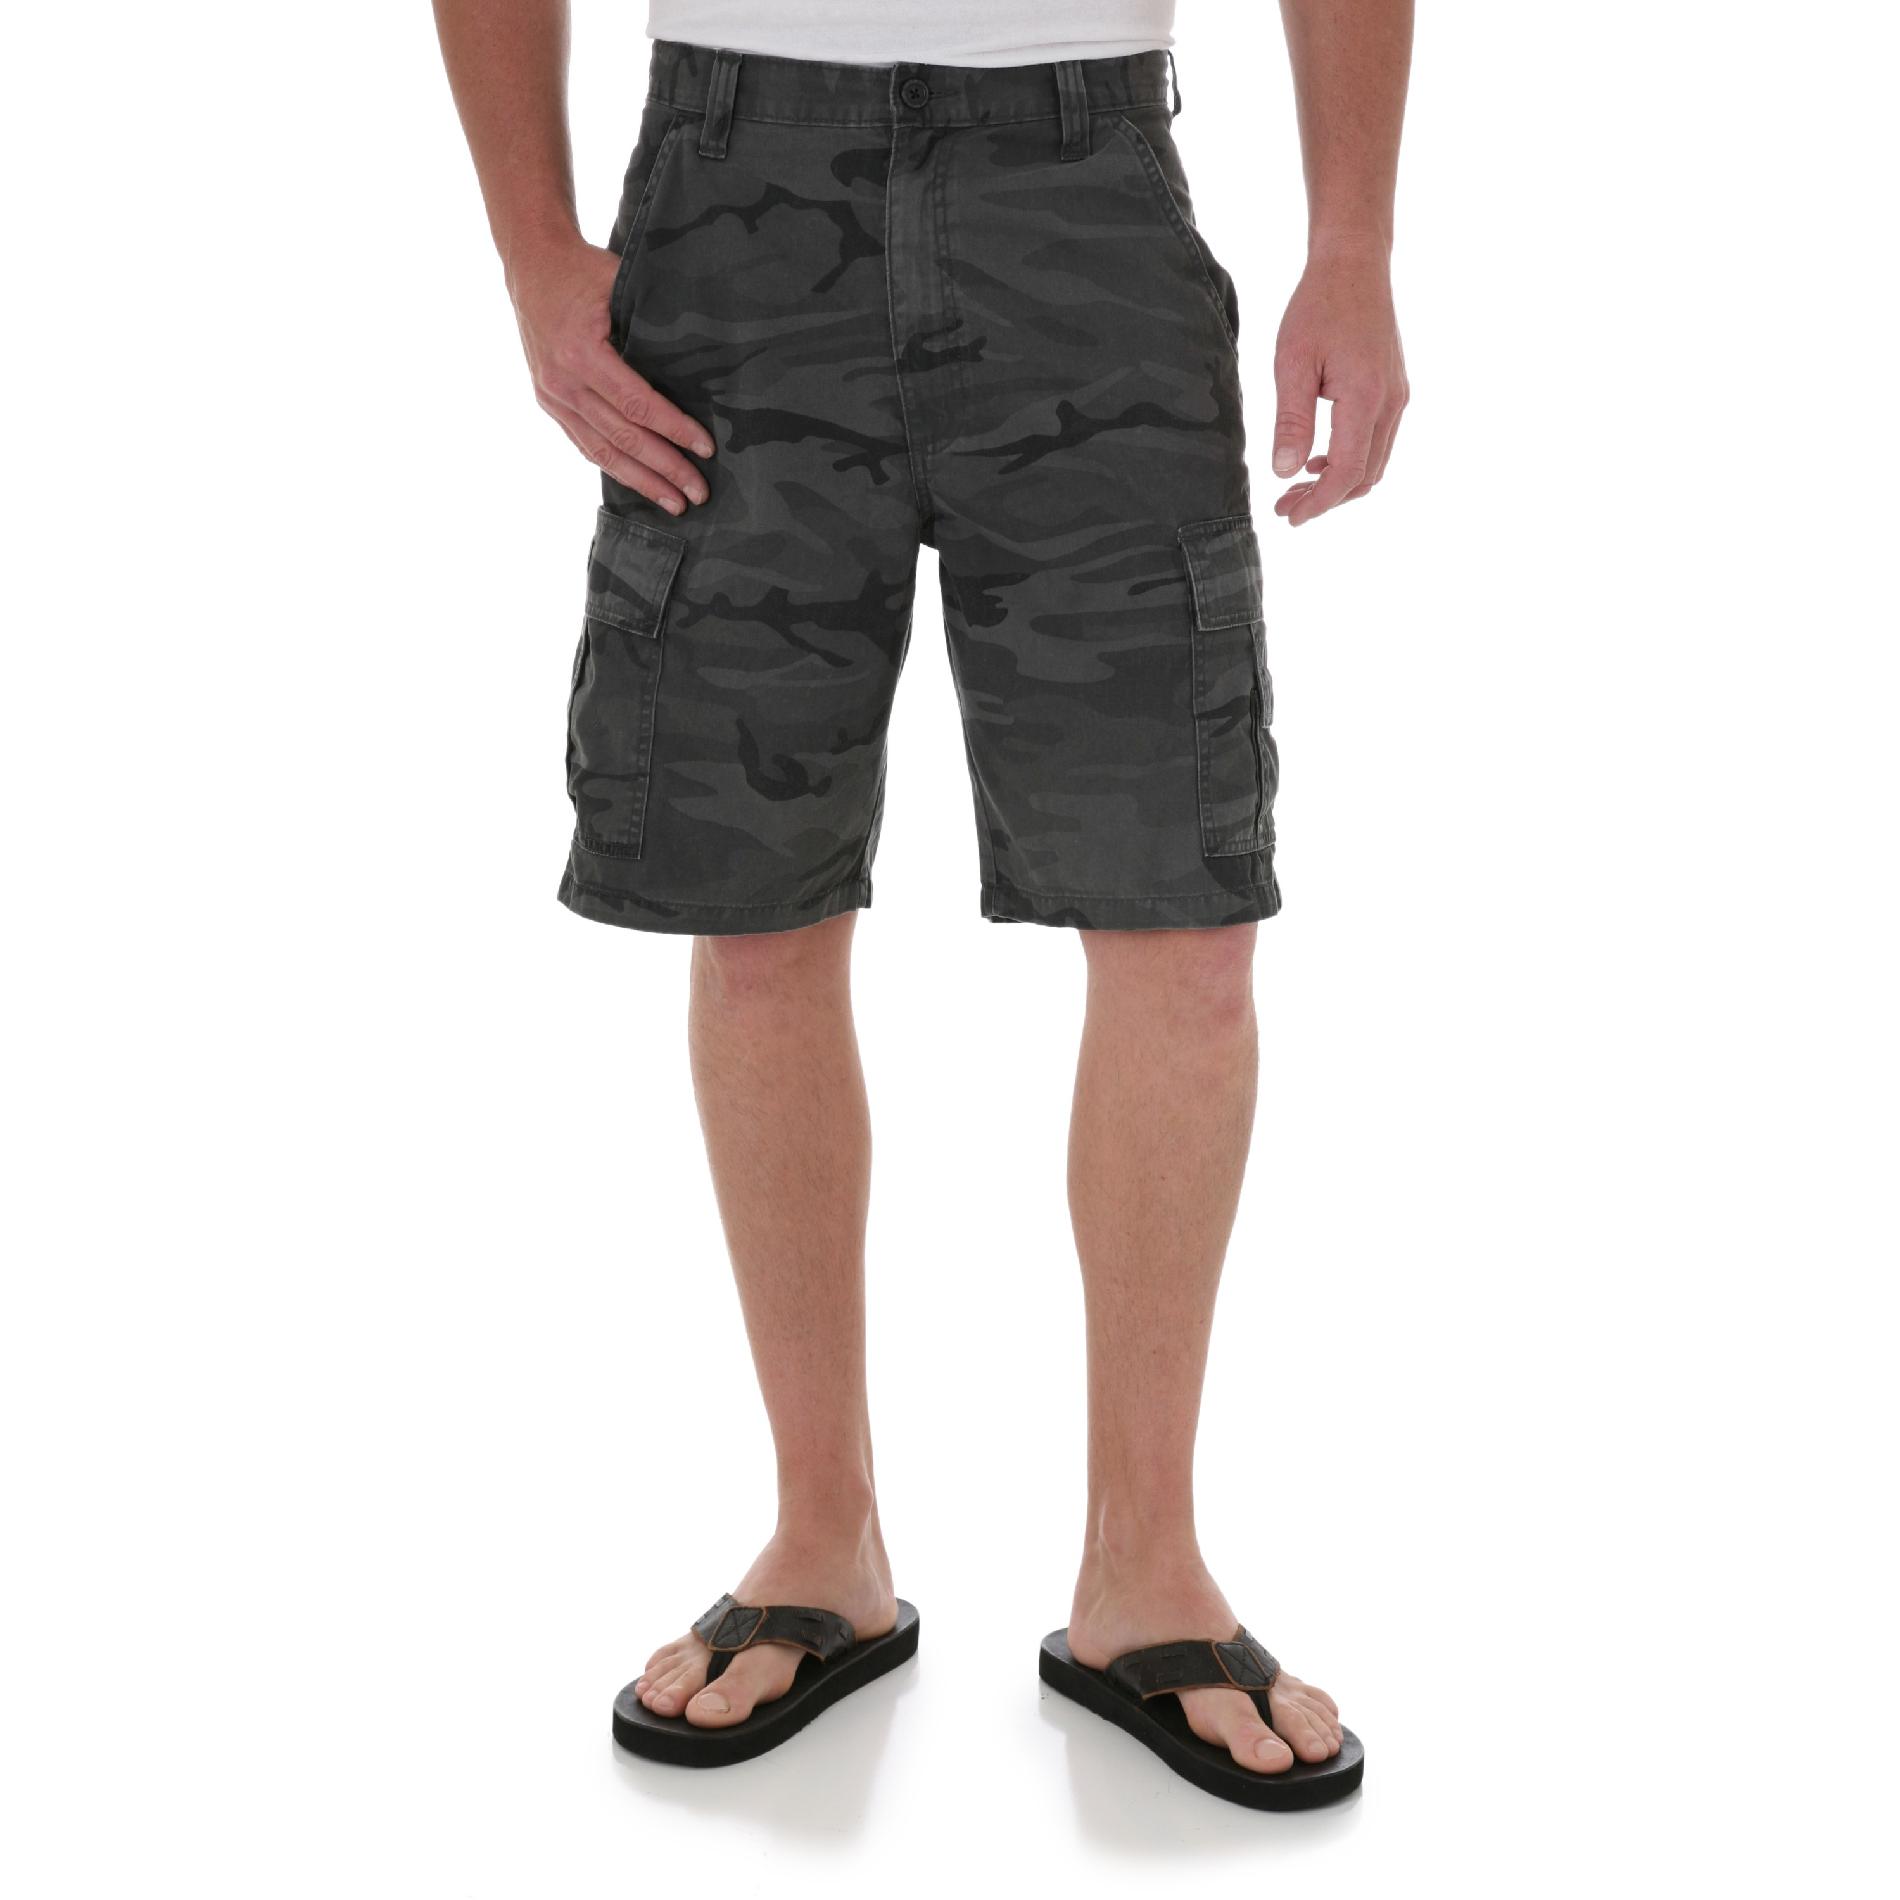 Men's Big and Tall Cargo Shorts - Camouflage